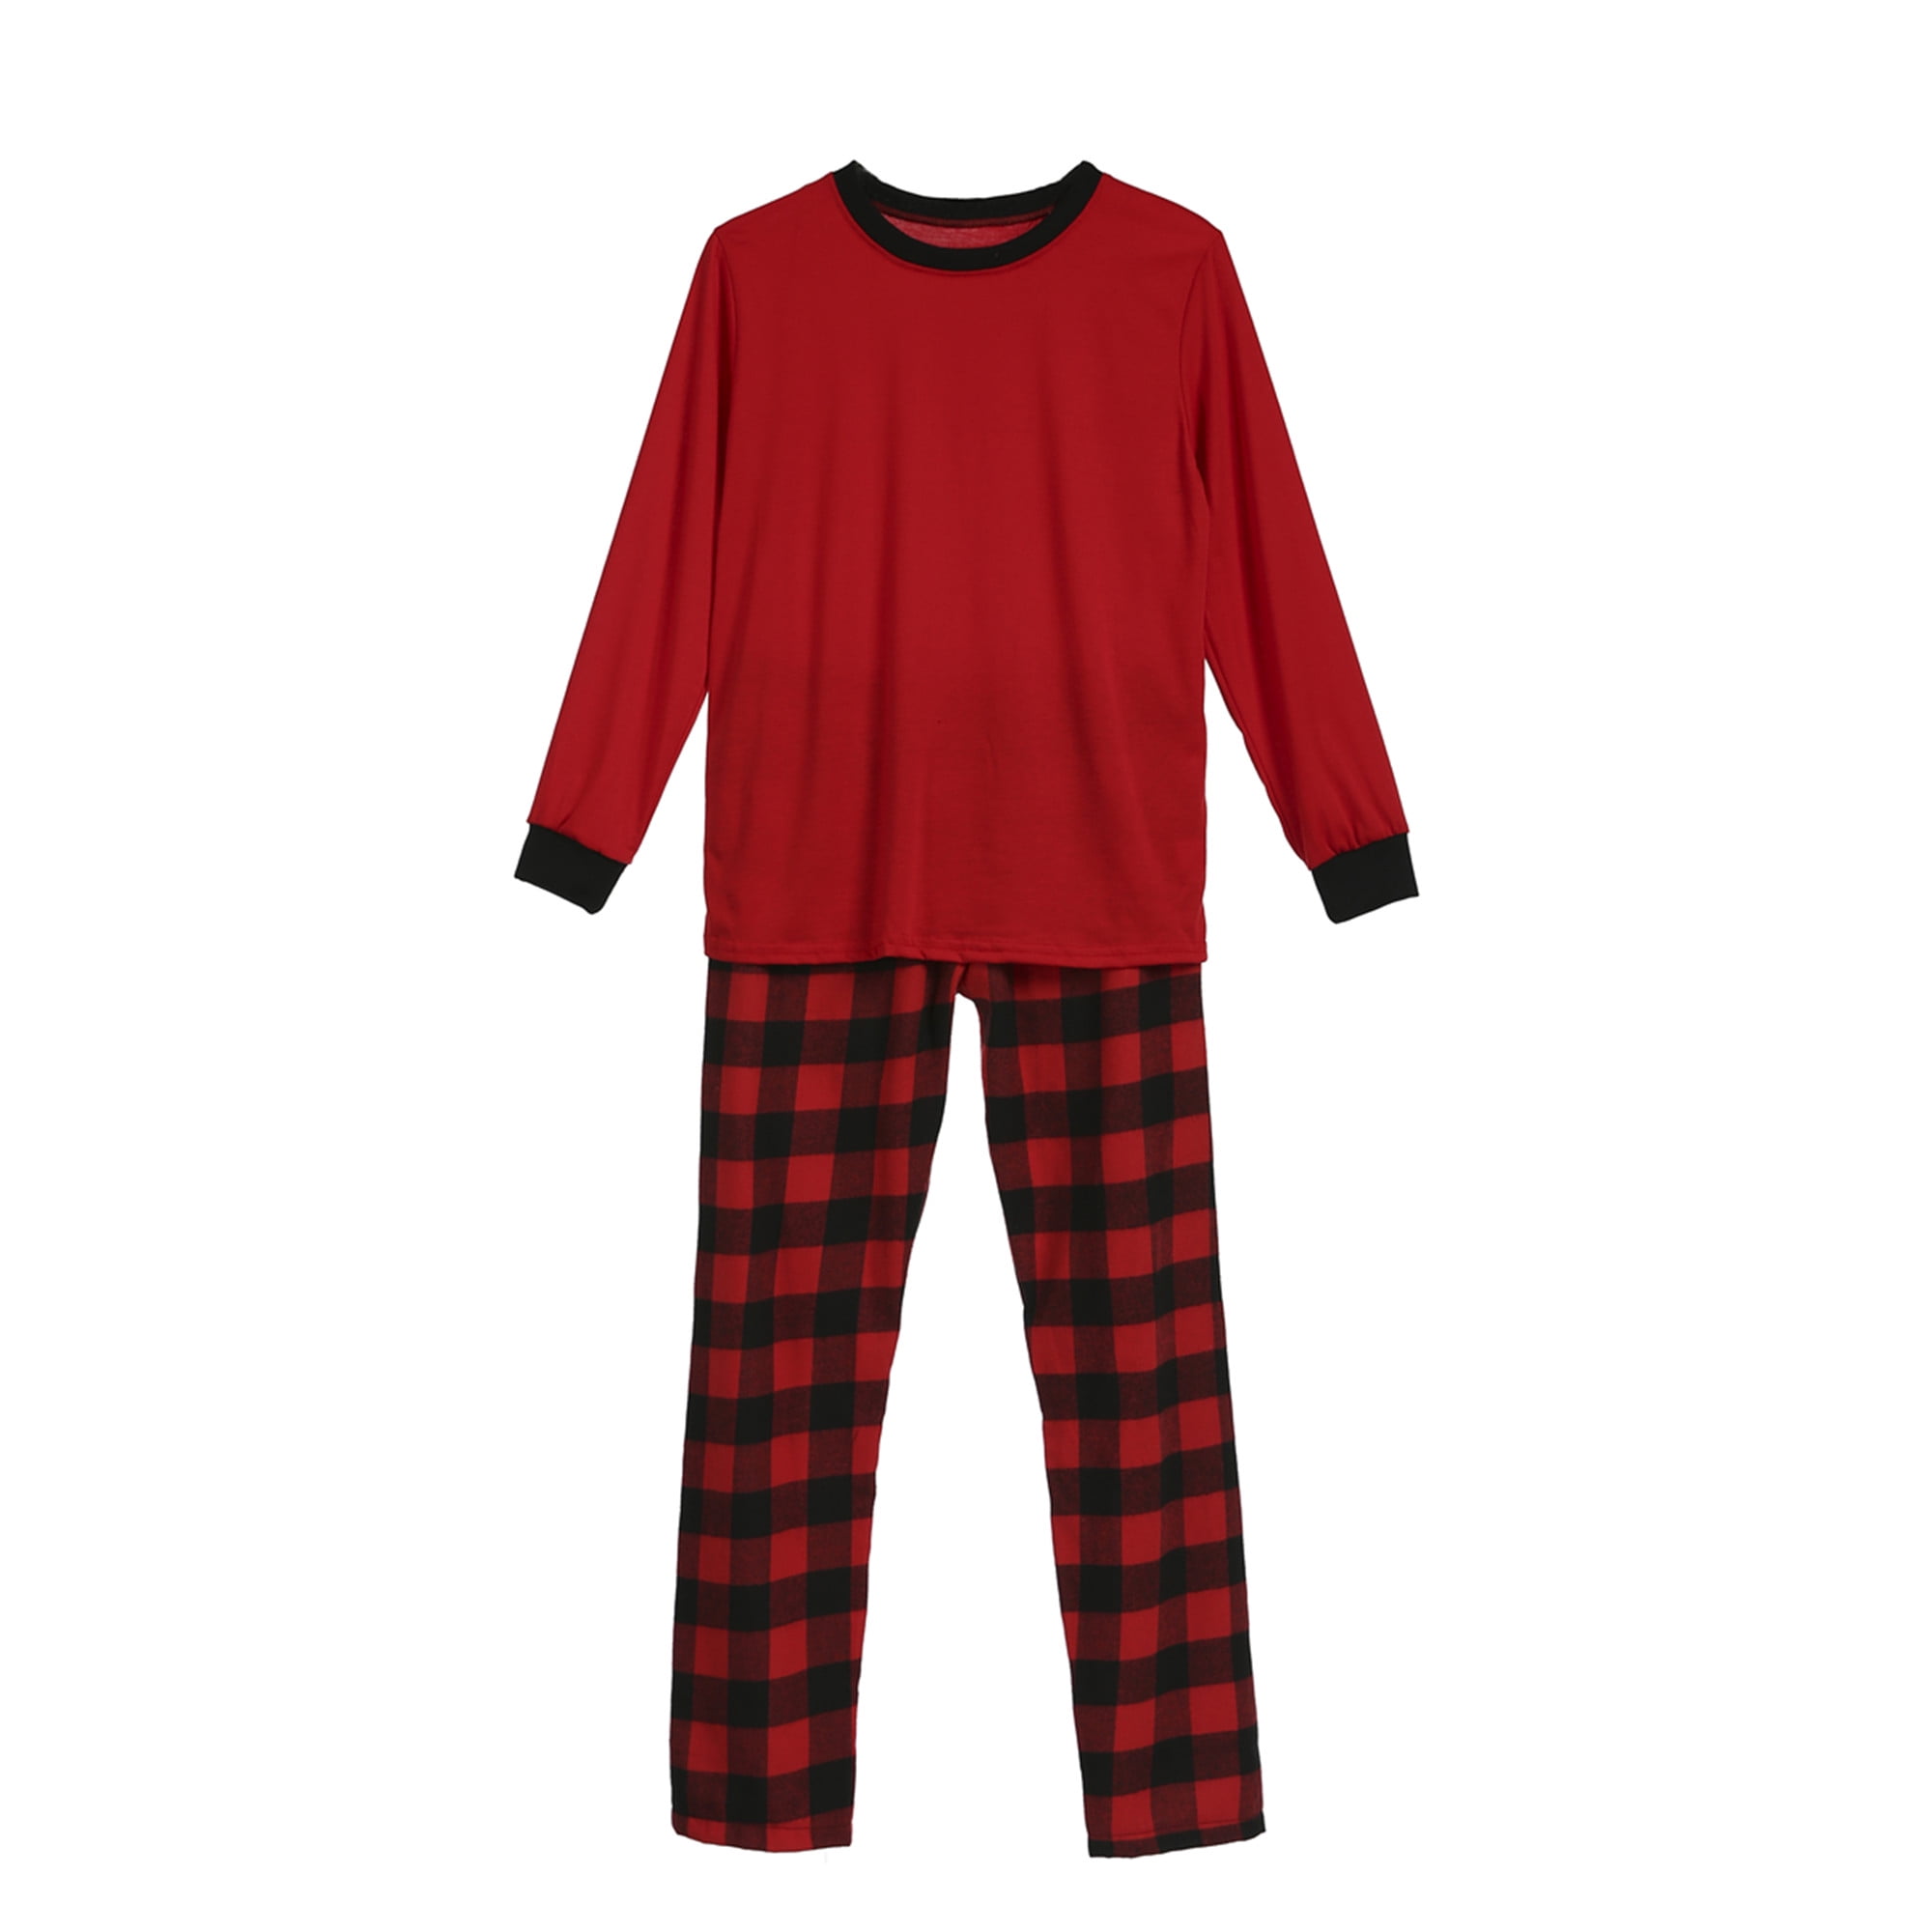 Details about  / STYLE /& CO LUNA SHINE SHORT SLEEVE PAJAMA SLEEP TOP RED SMALL